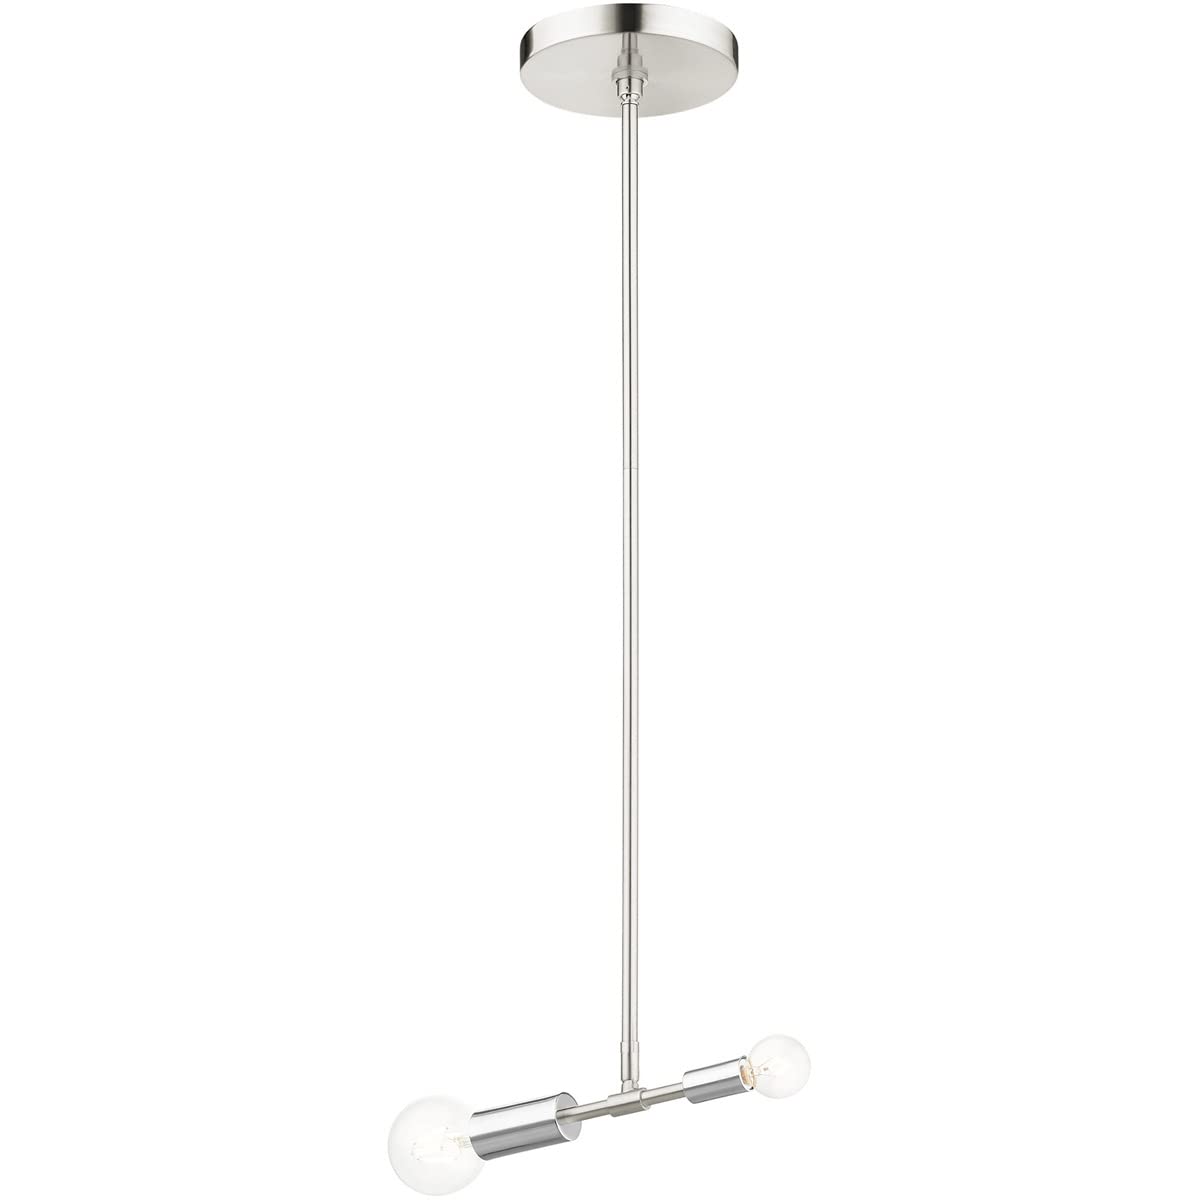 Livex 46432-91 Transitional One Light Pendant from Blairwood Collection in Pwt, Nckl, B/S, Slvr. Finish, 9.50 inches, Brushed Nickel